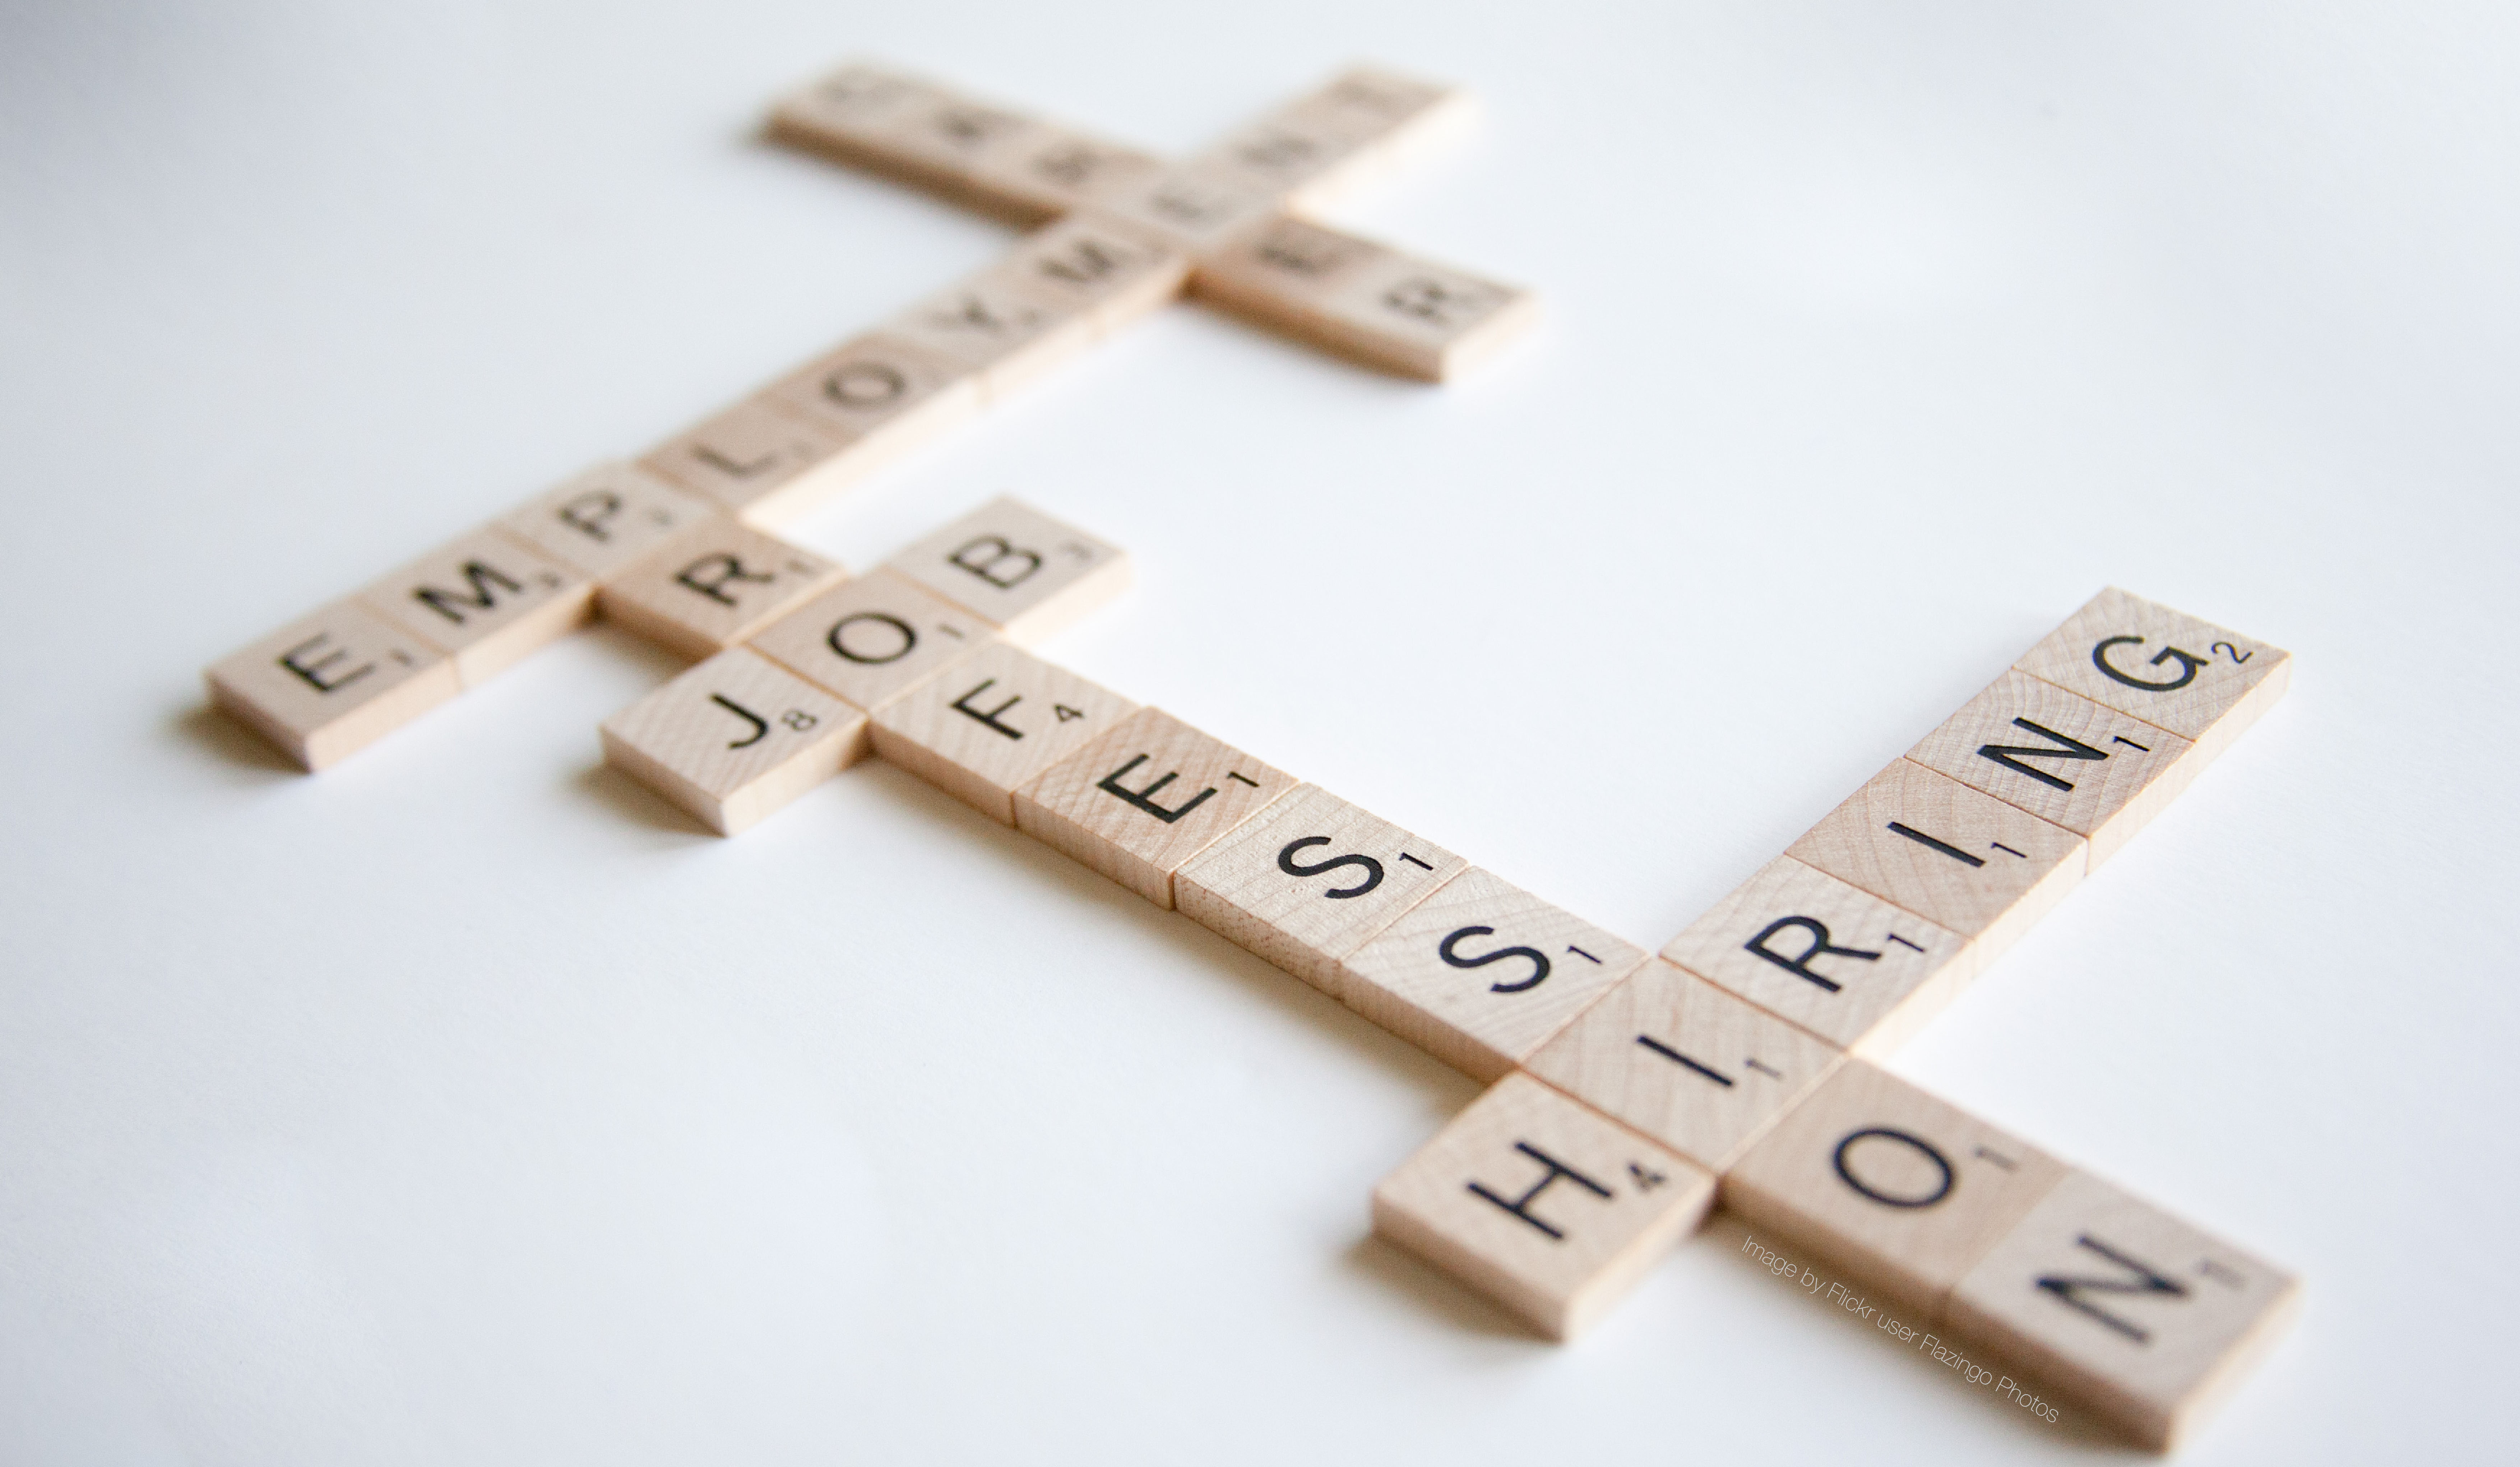 A scrabble game with words relating to employment.